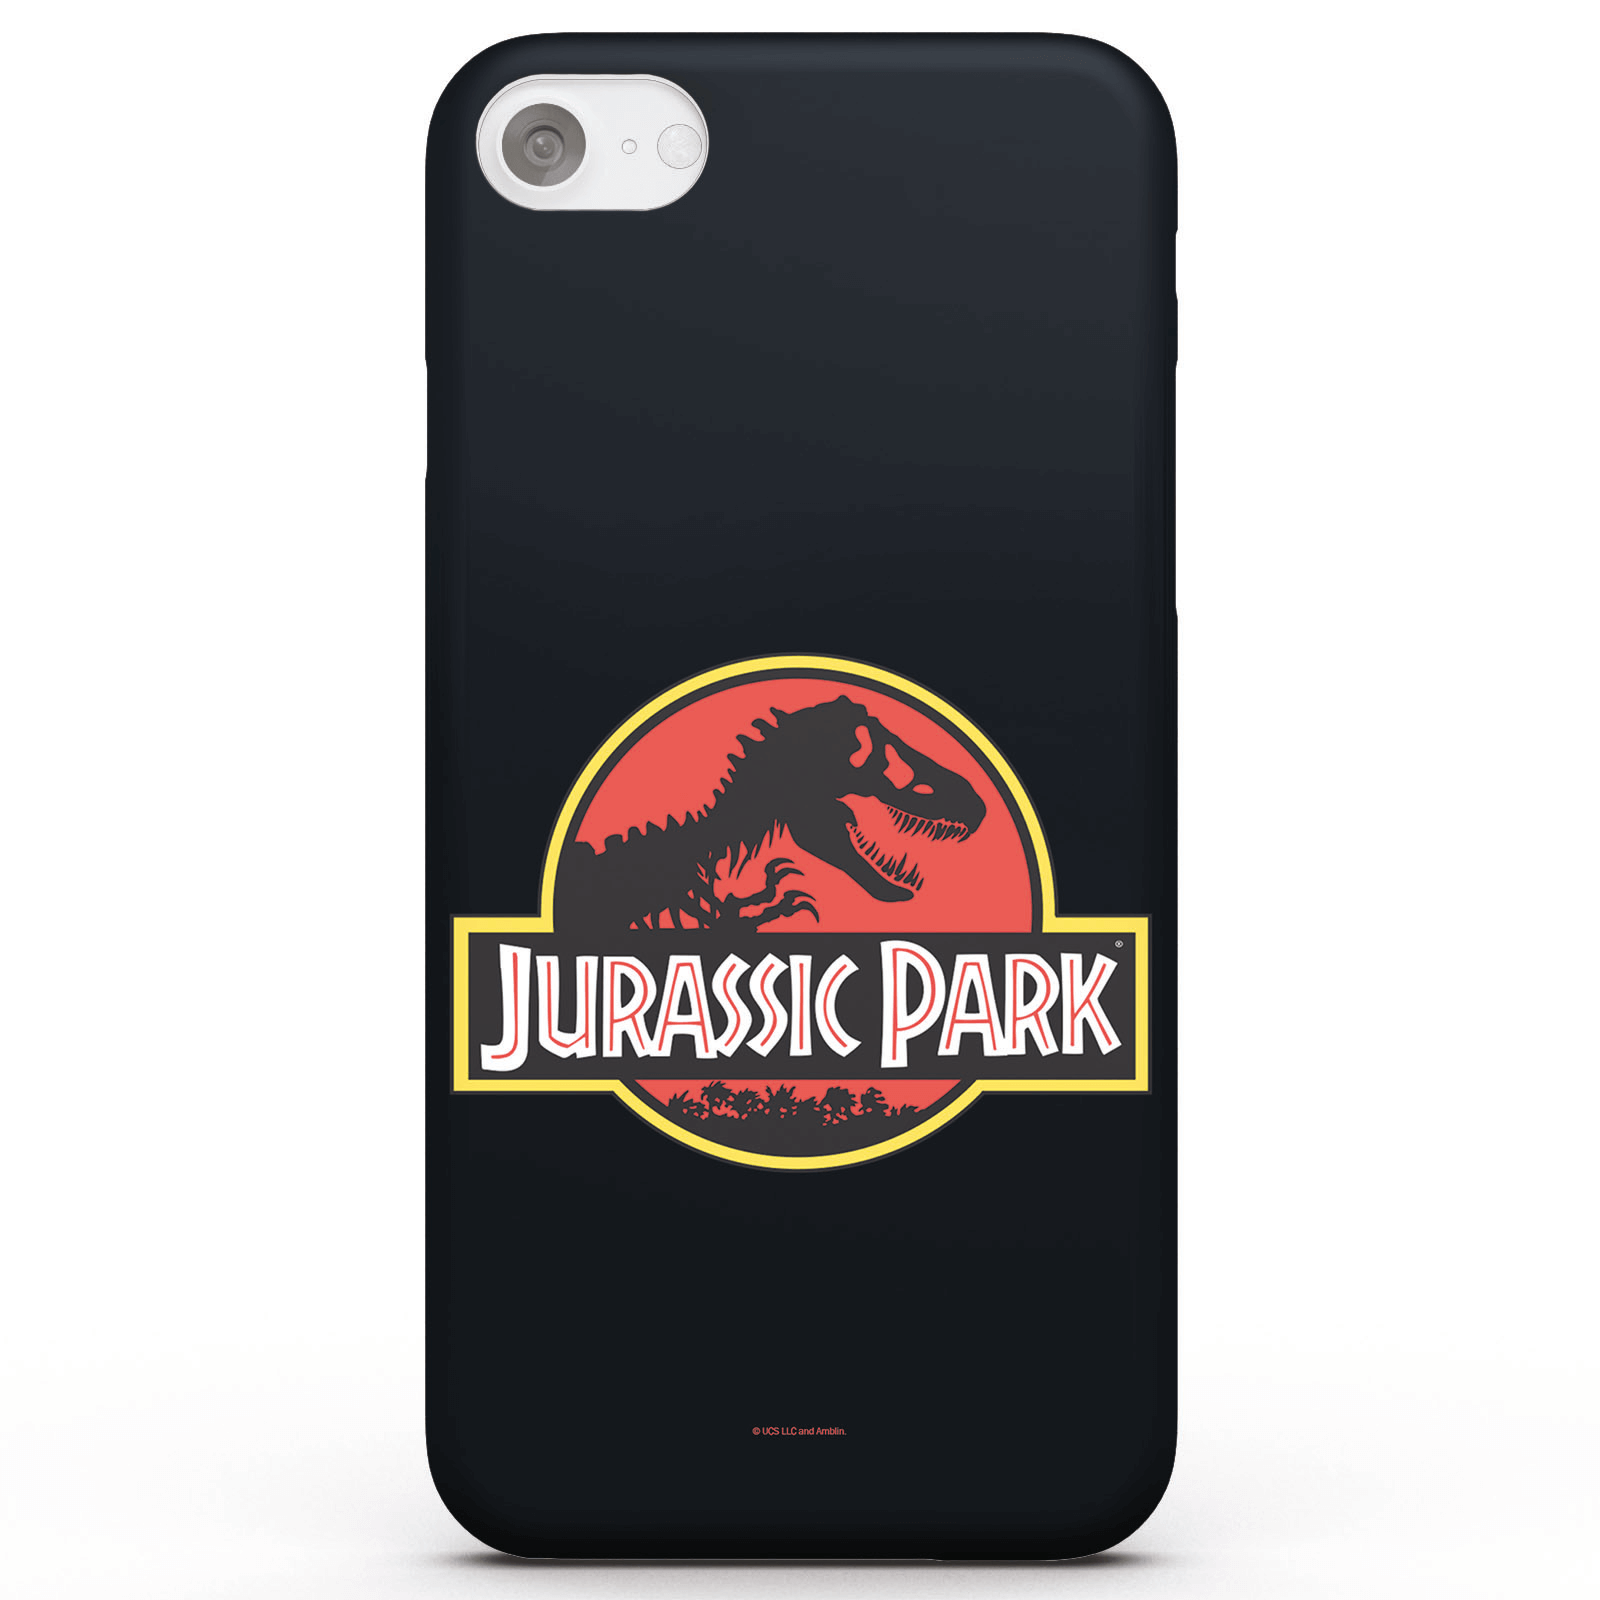 Photos - Case Jurassic Park Logo Phone  for iPhone and Android - iPhone 5C - Snap Ca